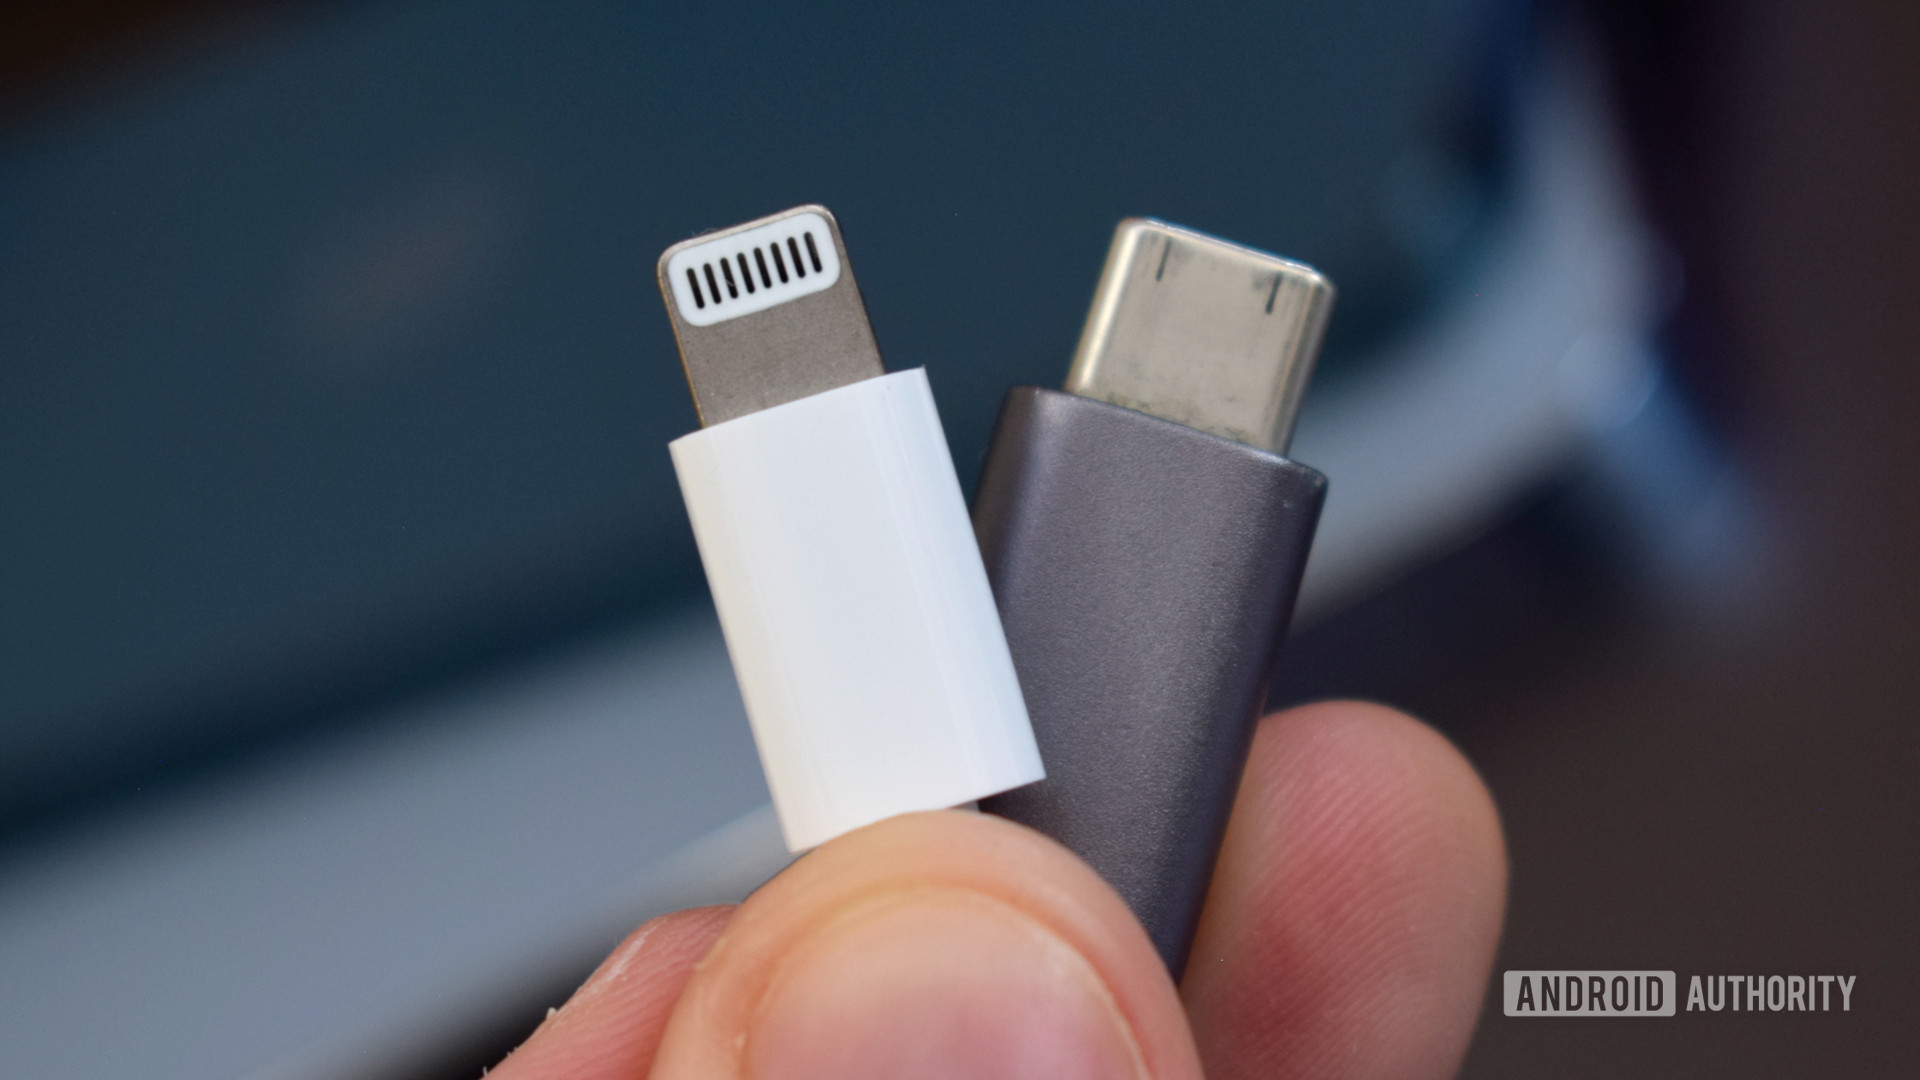 Lightning Connector vs USB C cable in hand